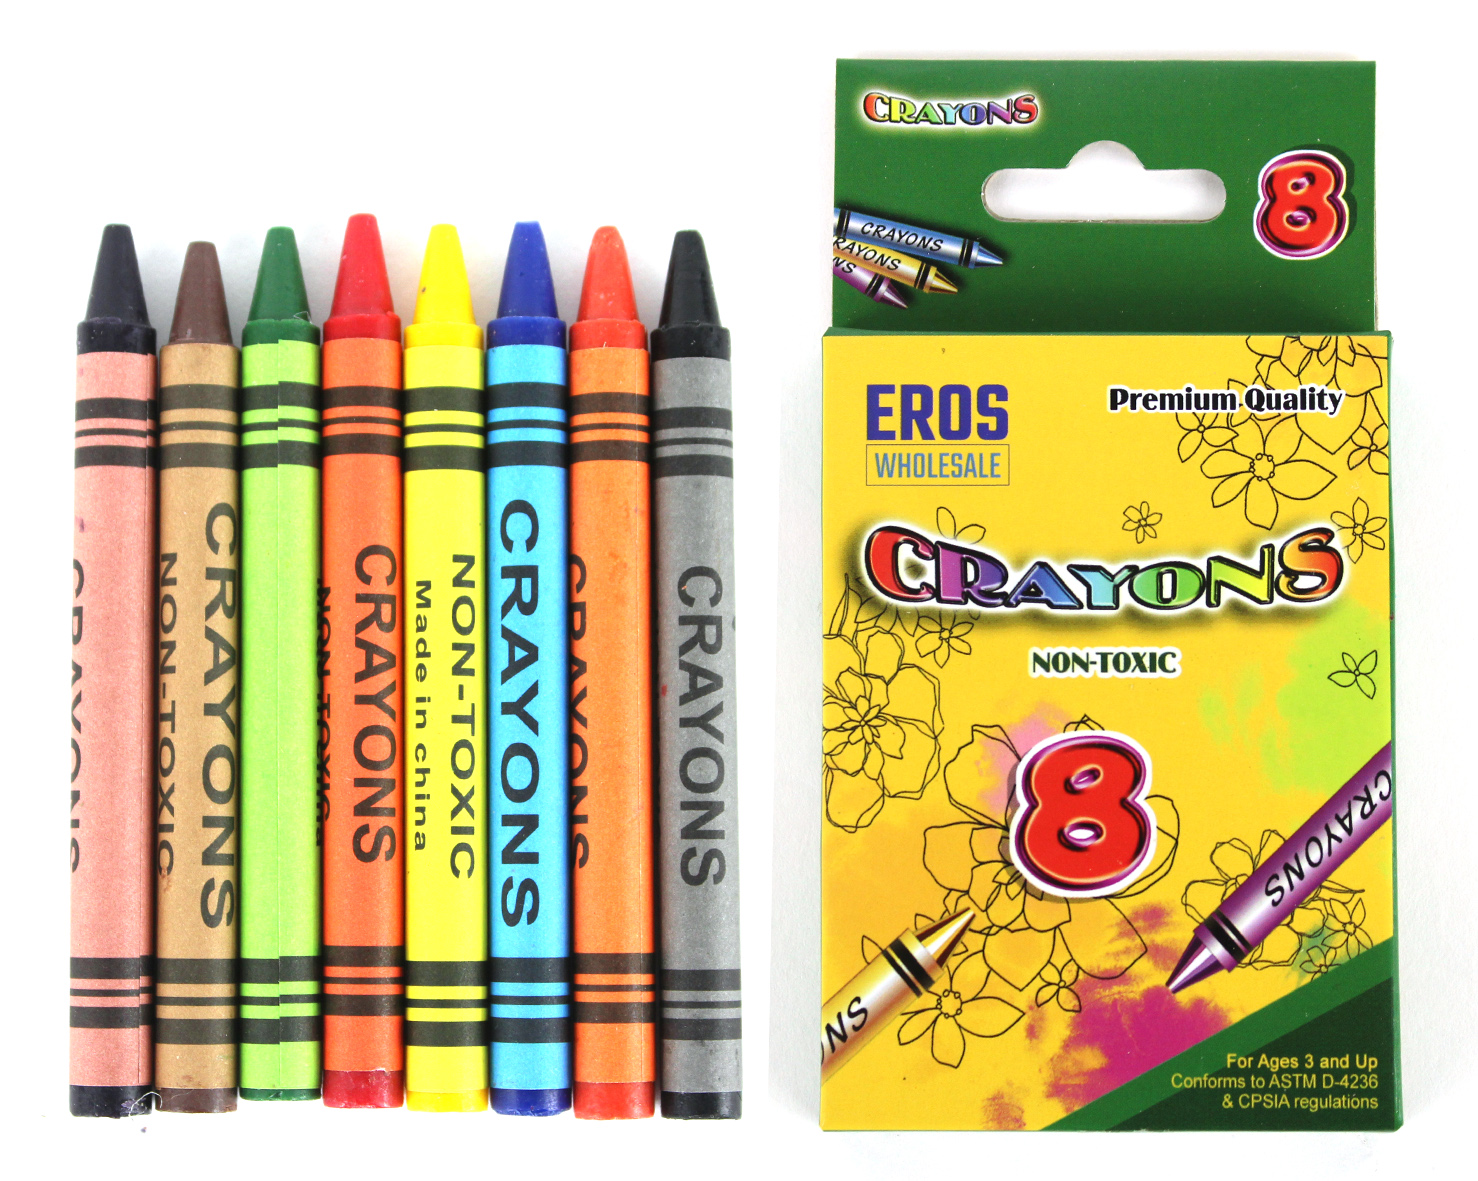 Sparkle Glitter Fun #2 Lead 7.5 Pencils (24 Pack) 6 Glitter Colors:  Yellow, Red